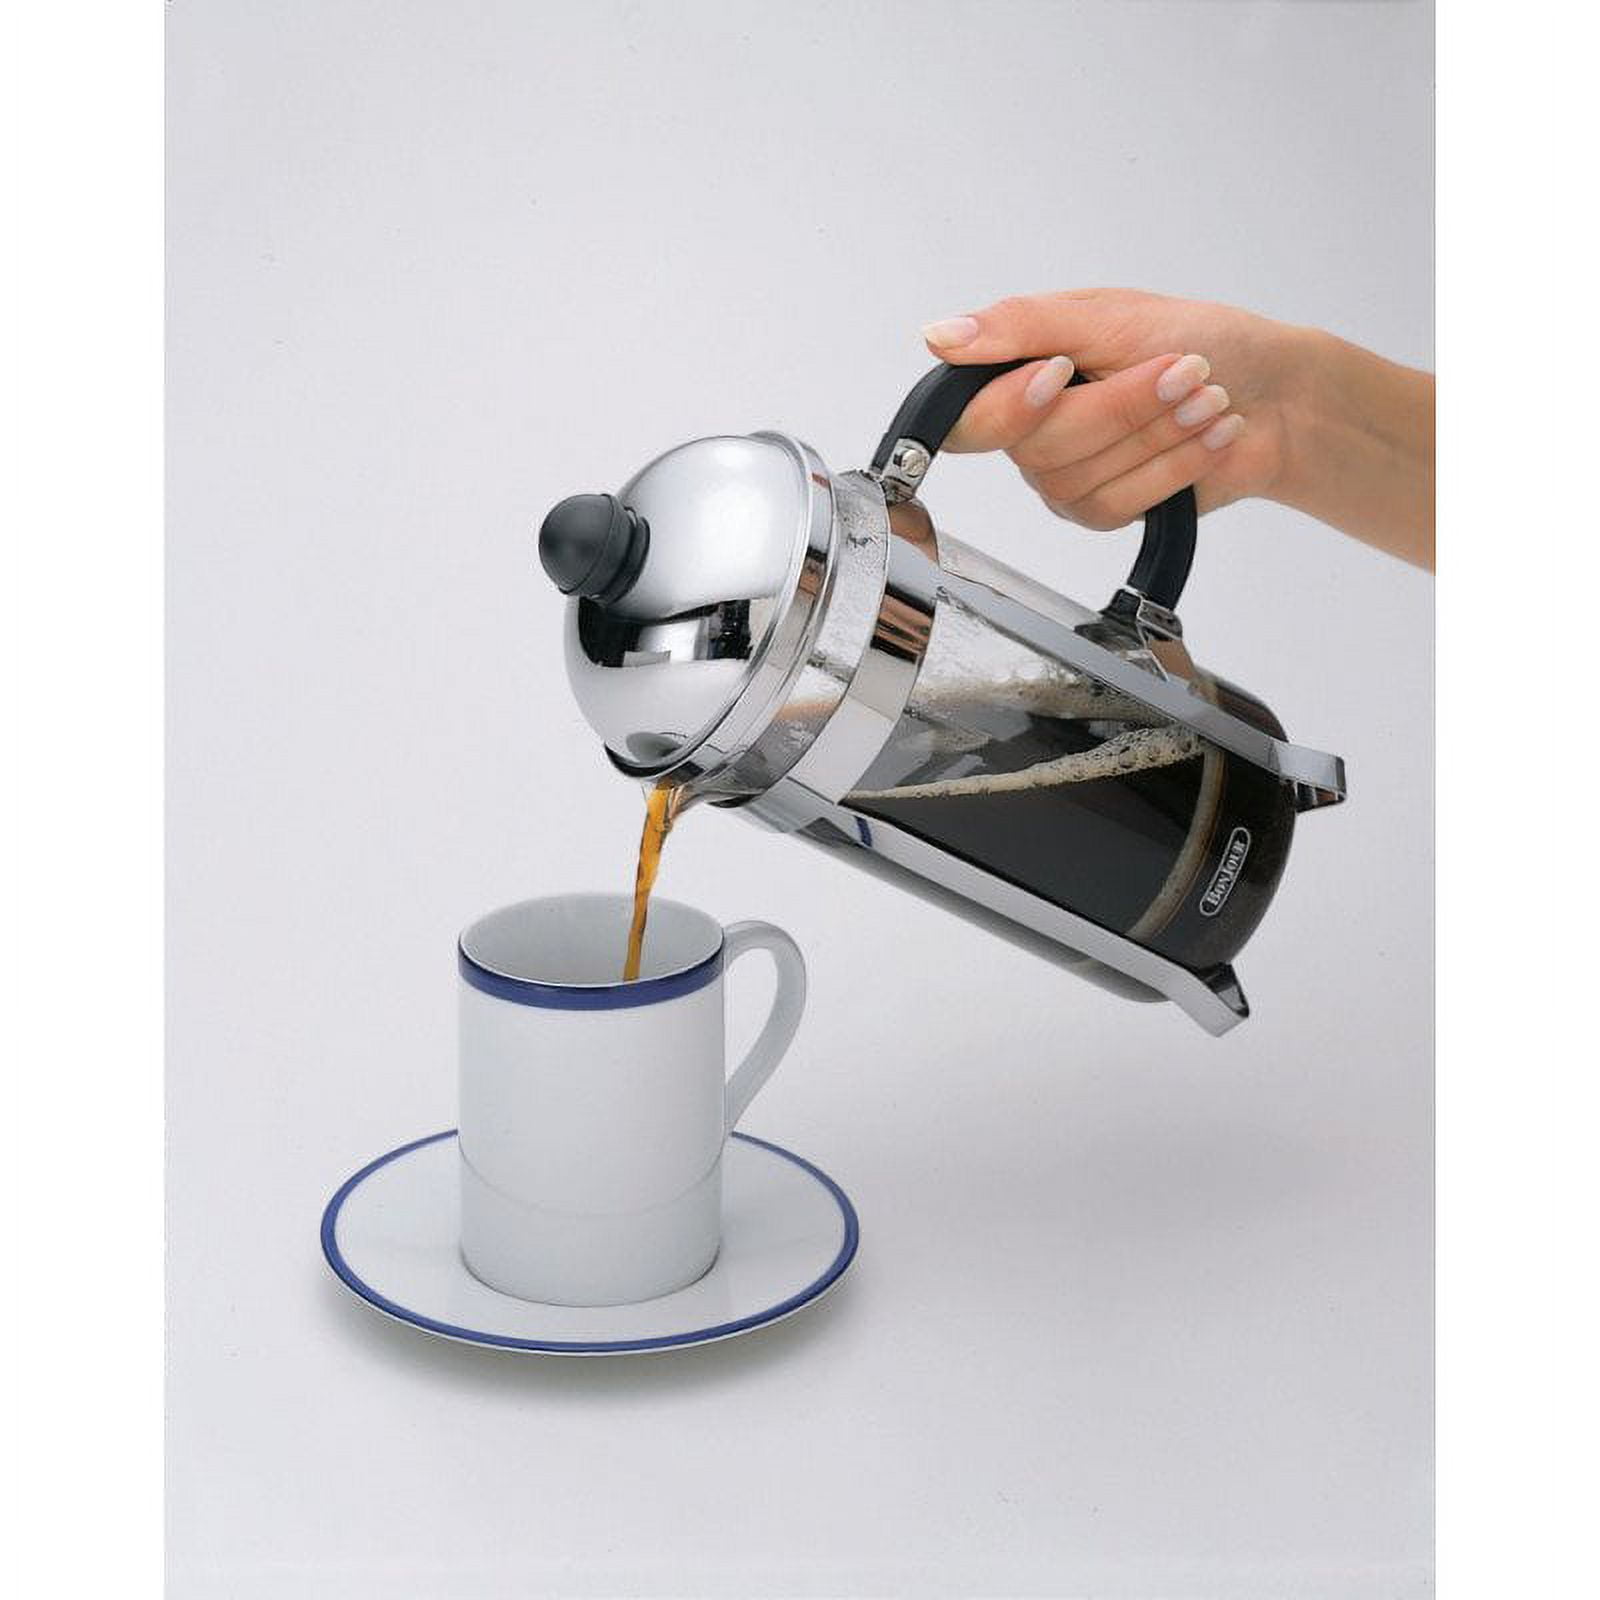 BonJour Coffee Stainless Steel Oval Milk Frother with Stand - Bed